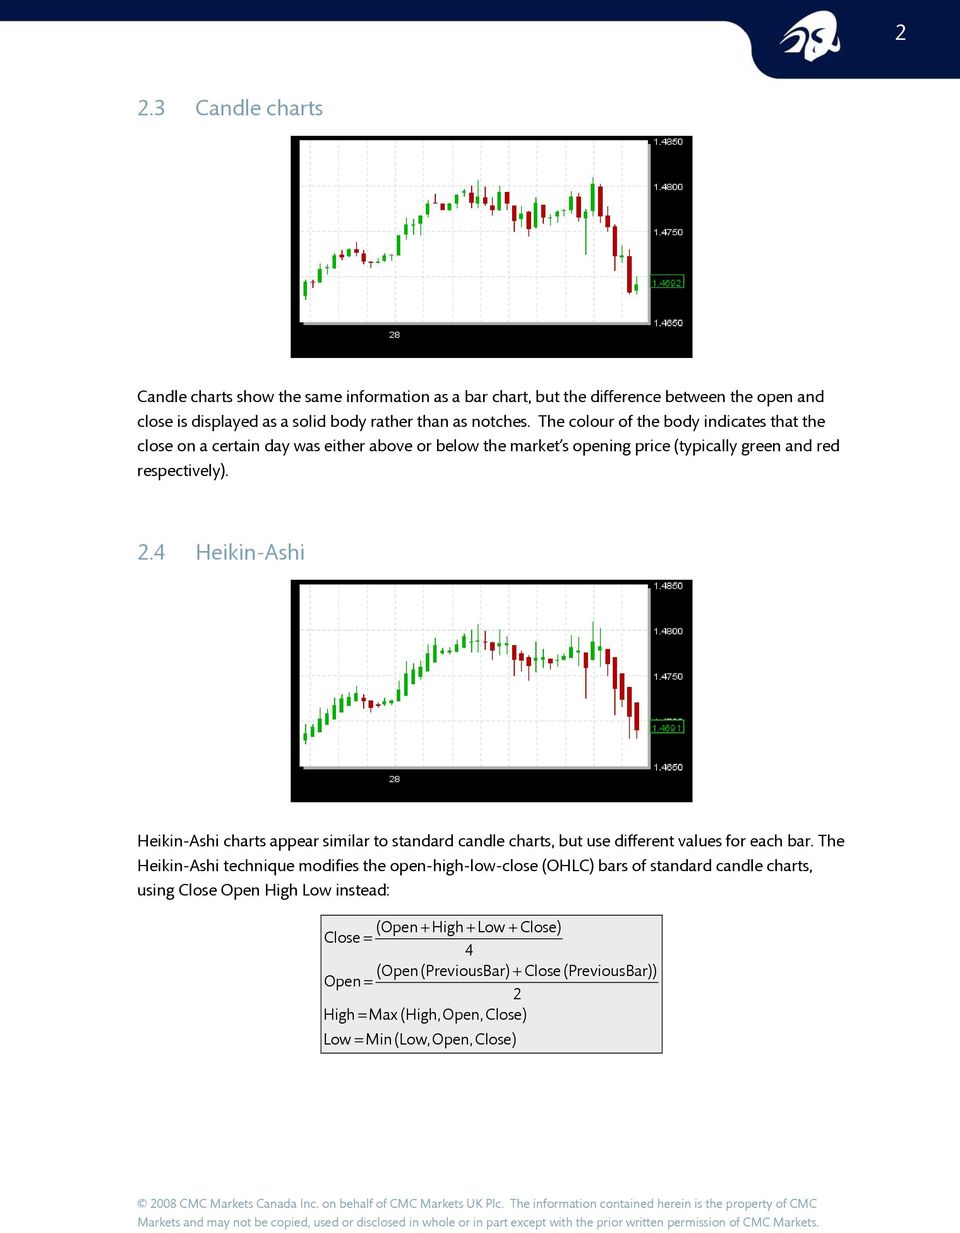 4 Heikin-Ashi Heikin-Ashi charts appear similar to standard candle charts, but use different values for each bar.